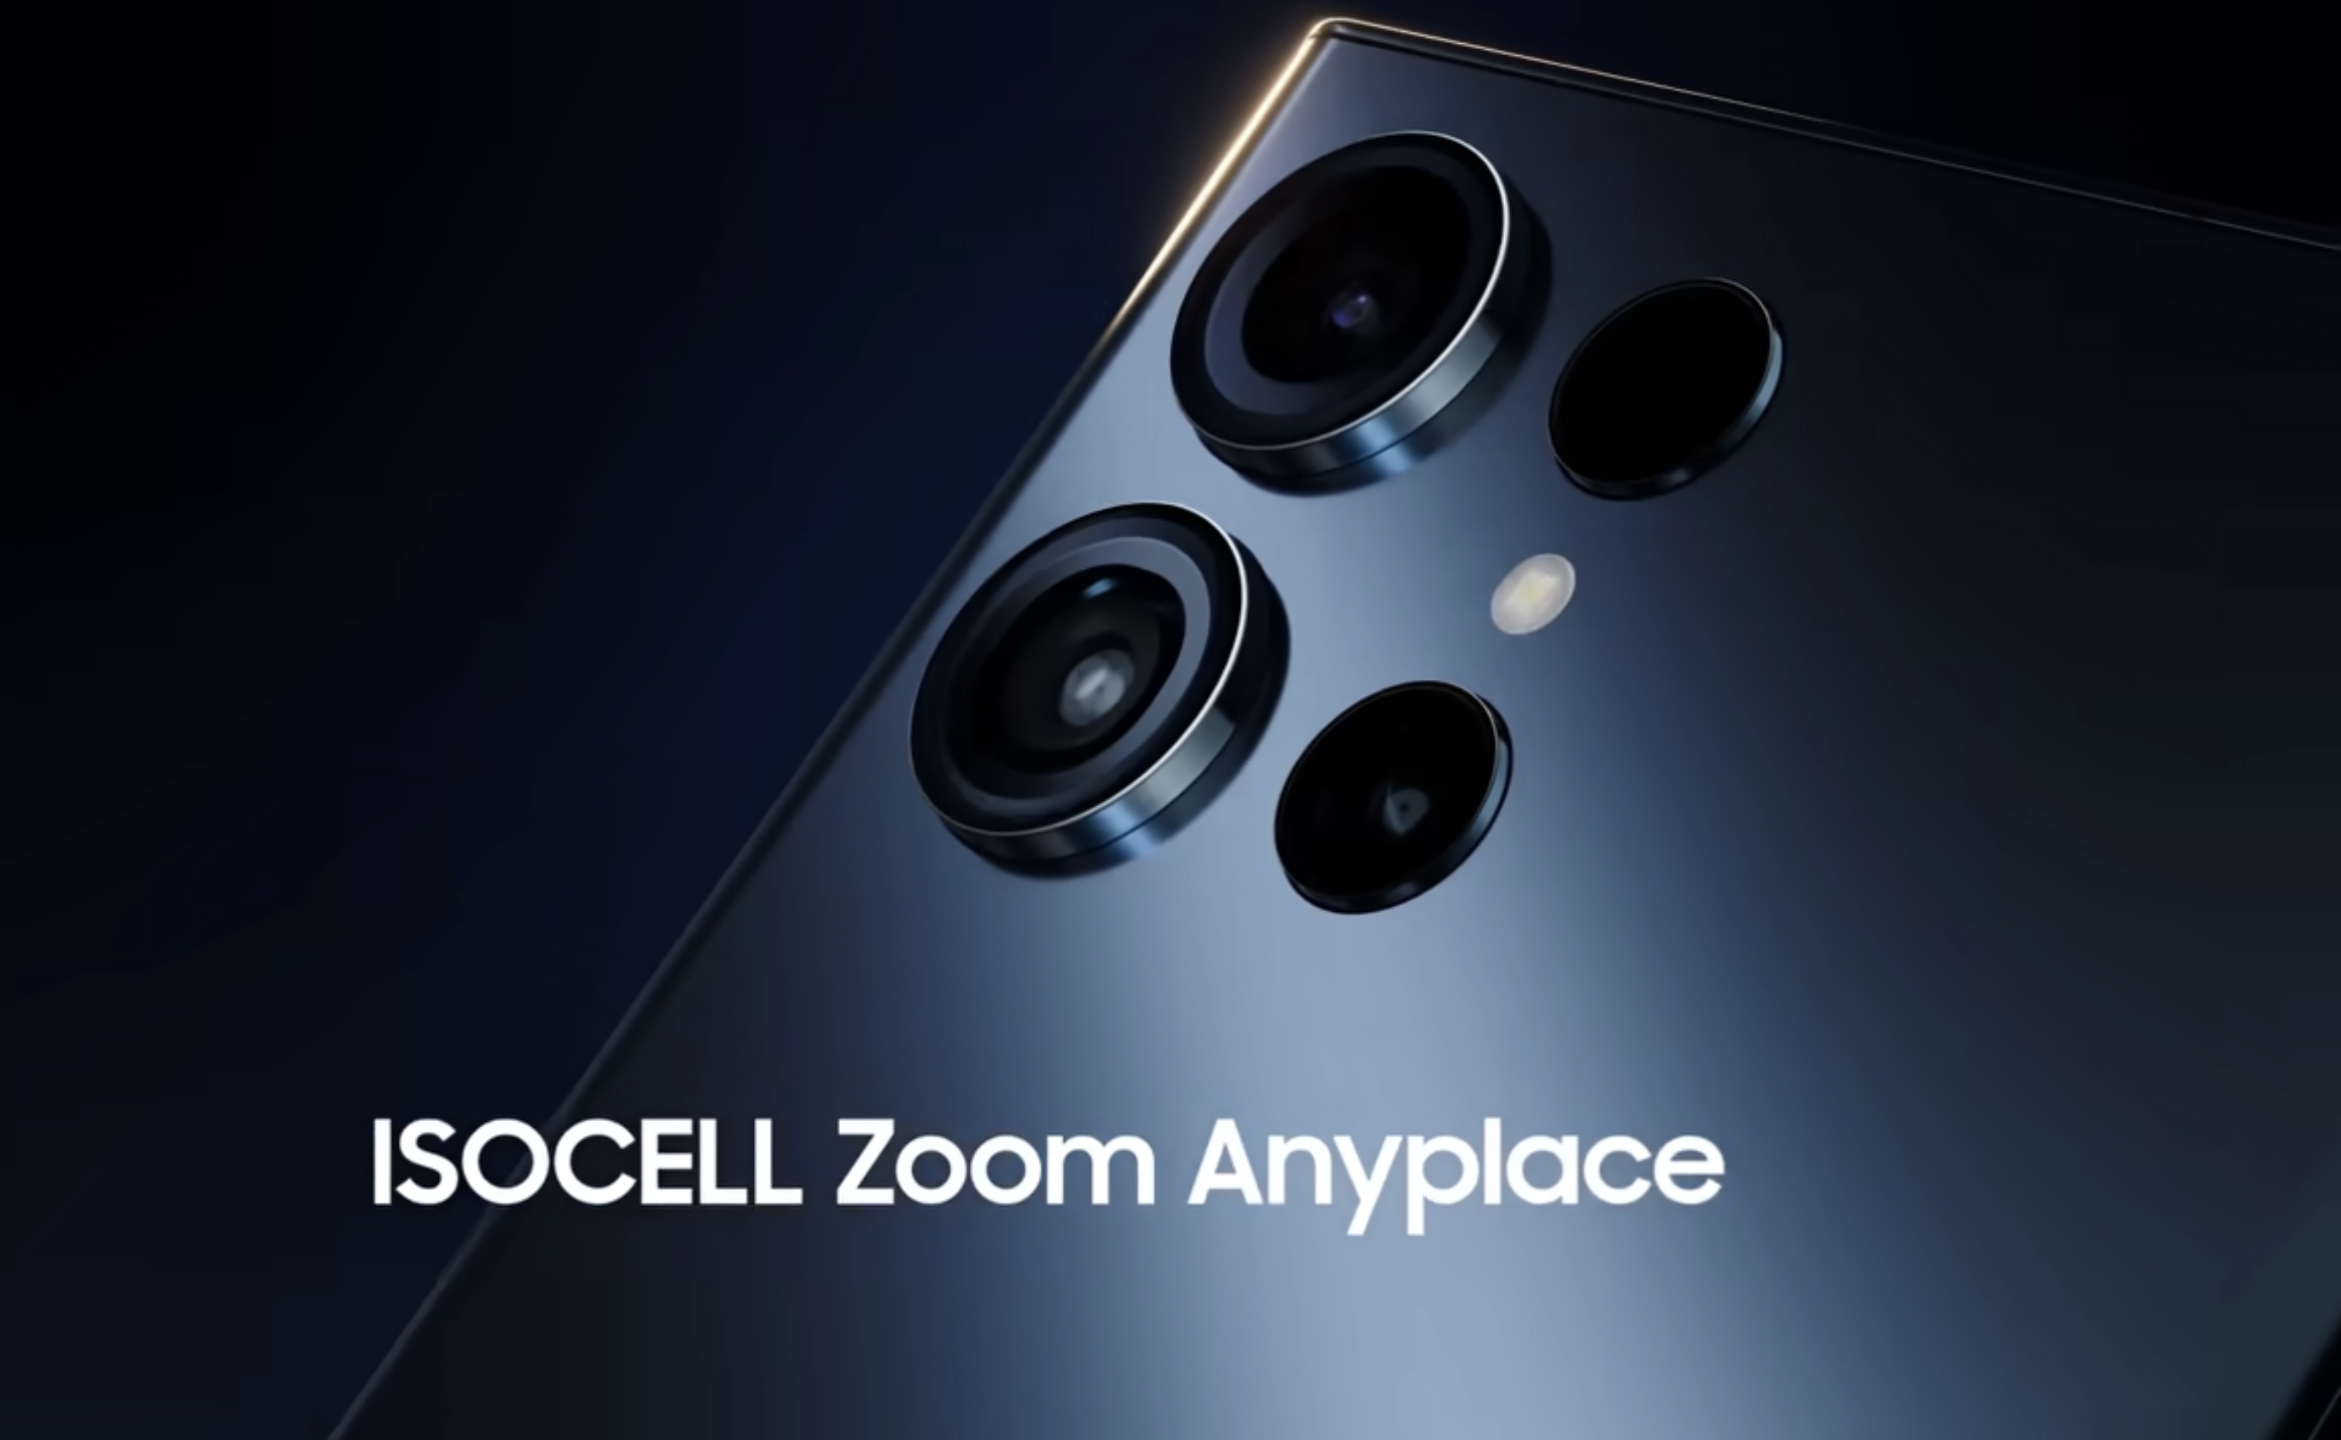 Samsung demonstrates new 200 MP ISOCELL Zoom Anyplace camera